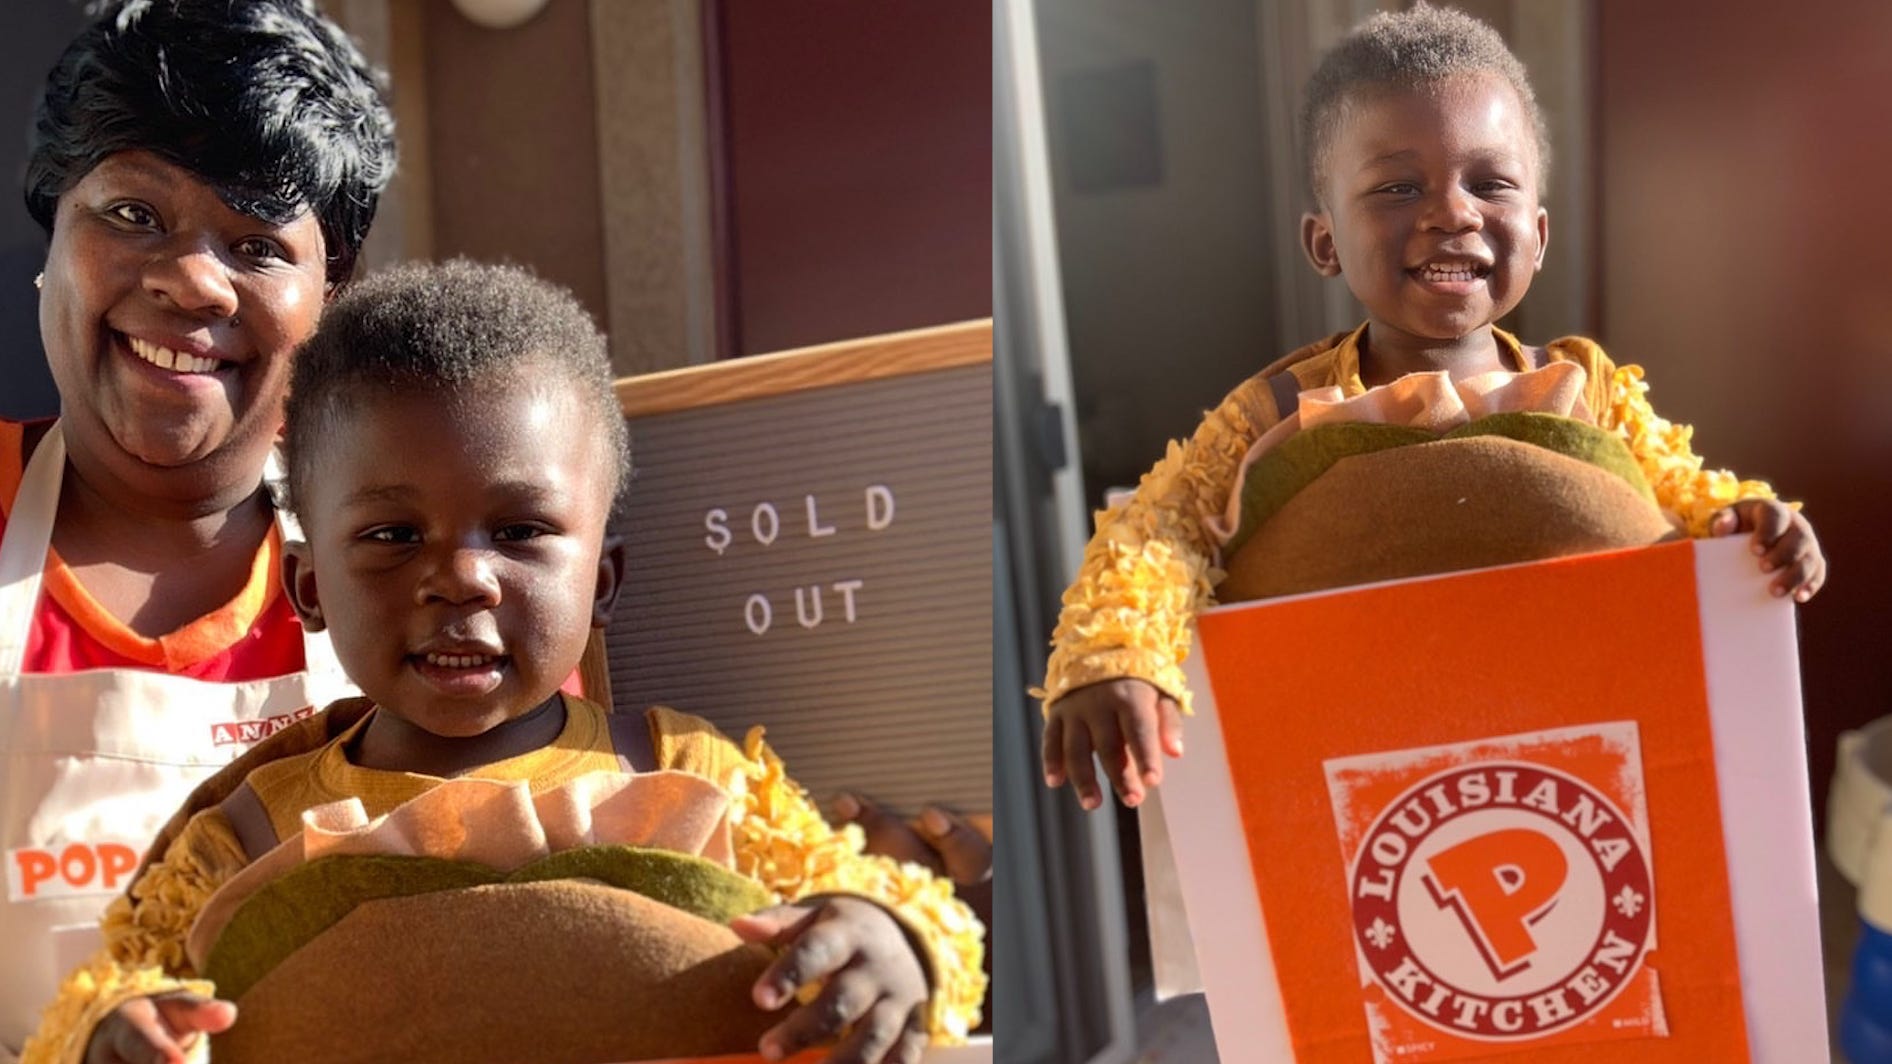 Popeyes Chicken Sandwich Mommy And Me Costume Wins Halloween